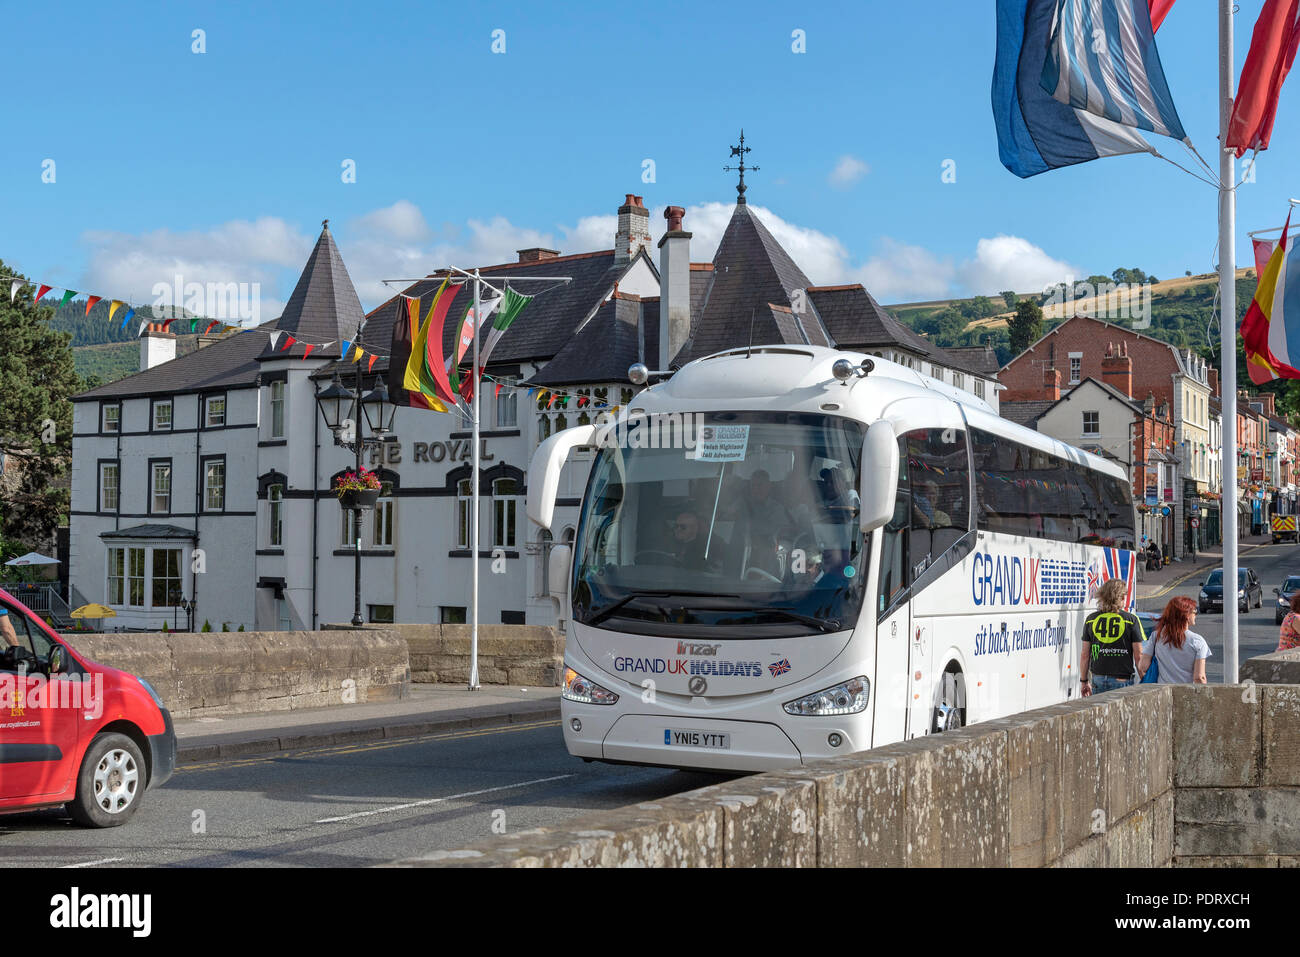 Llangollen, Denbighshire, North Wales, UK. A popular tourist attraction which stands on the River Dee. A tourbus passing over the town bridge. Stock Photo